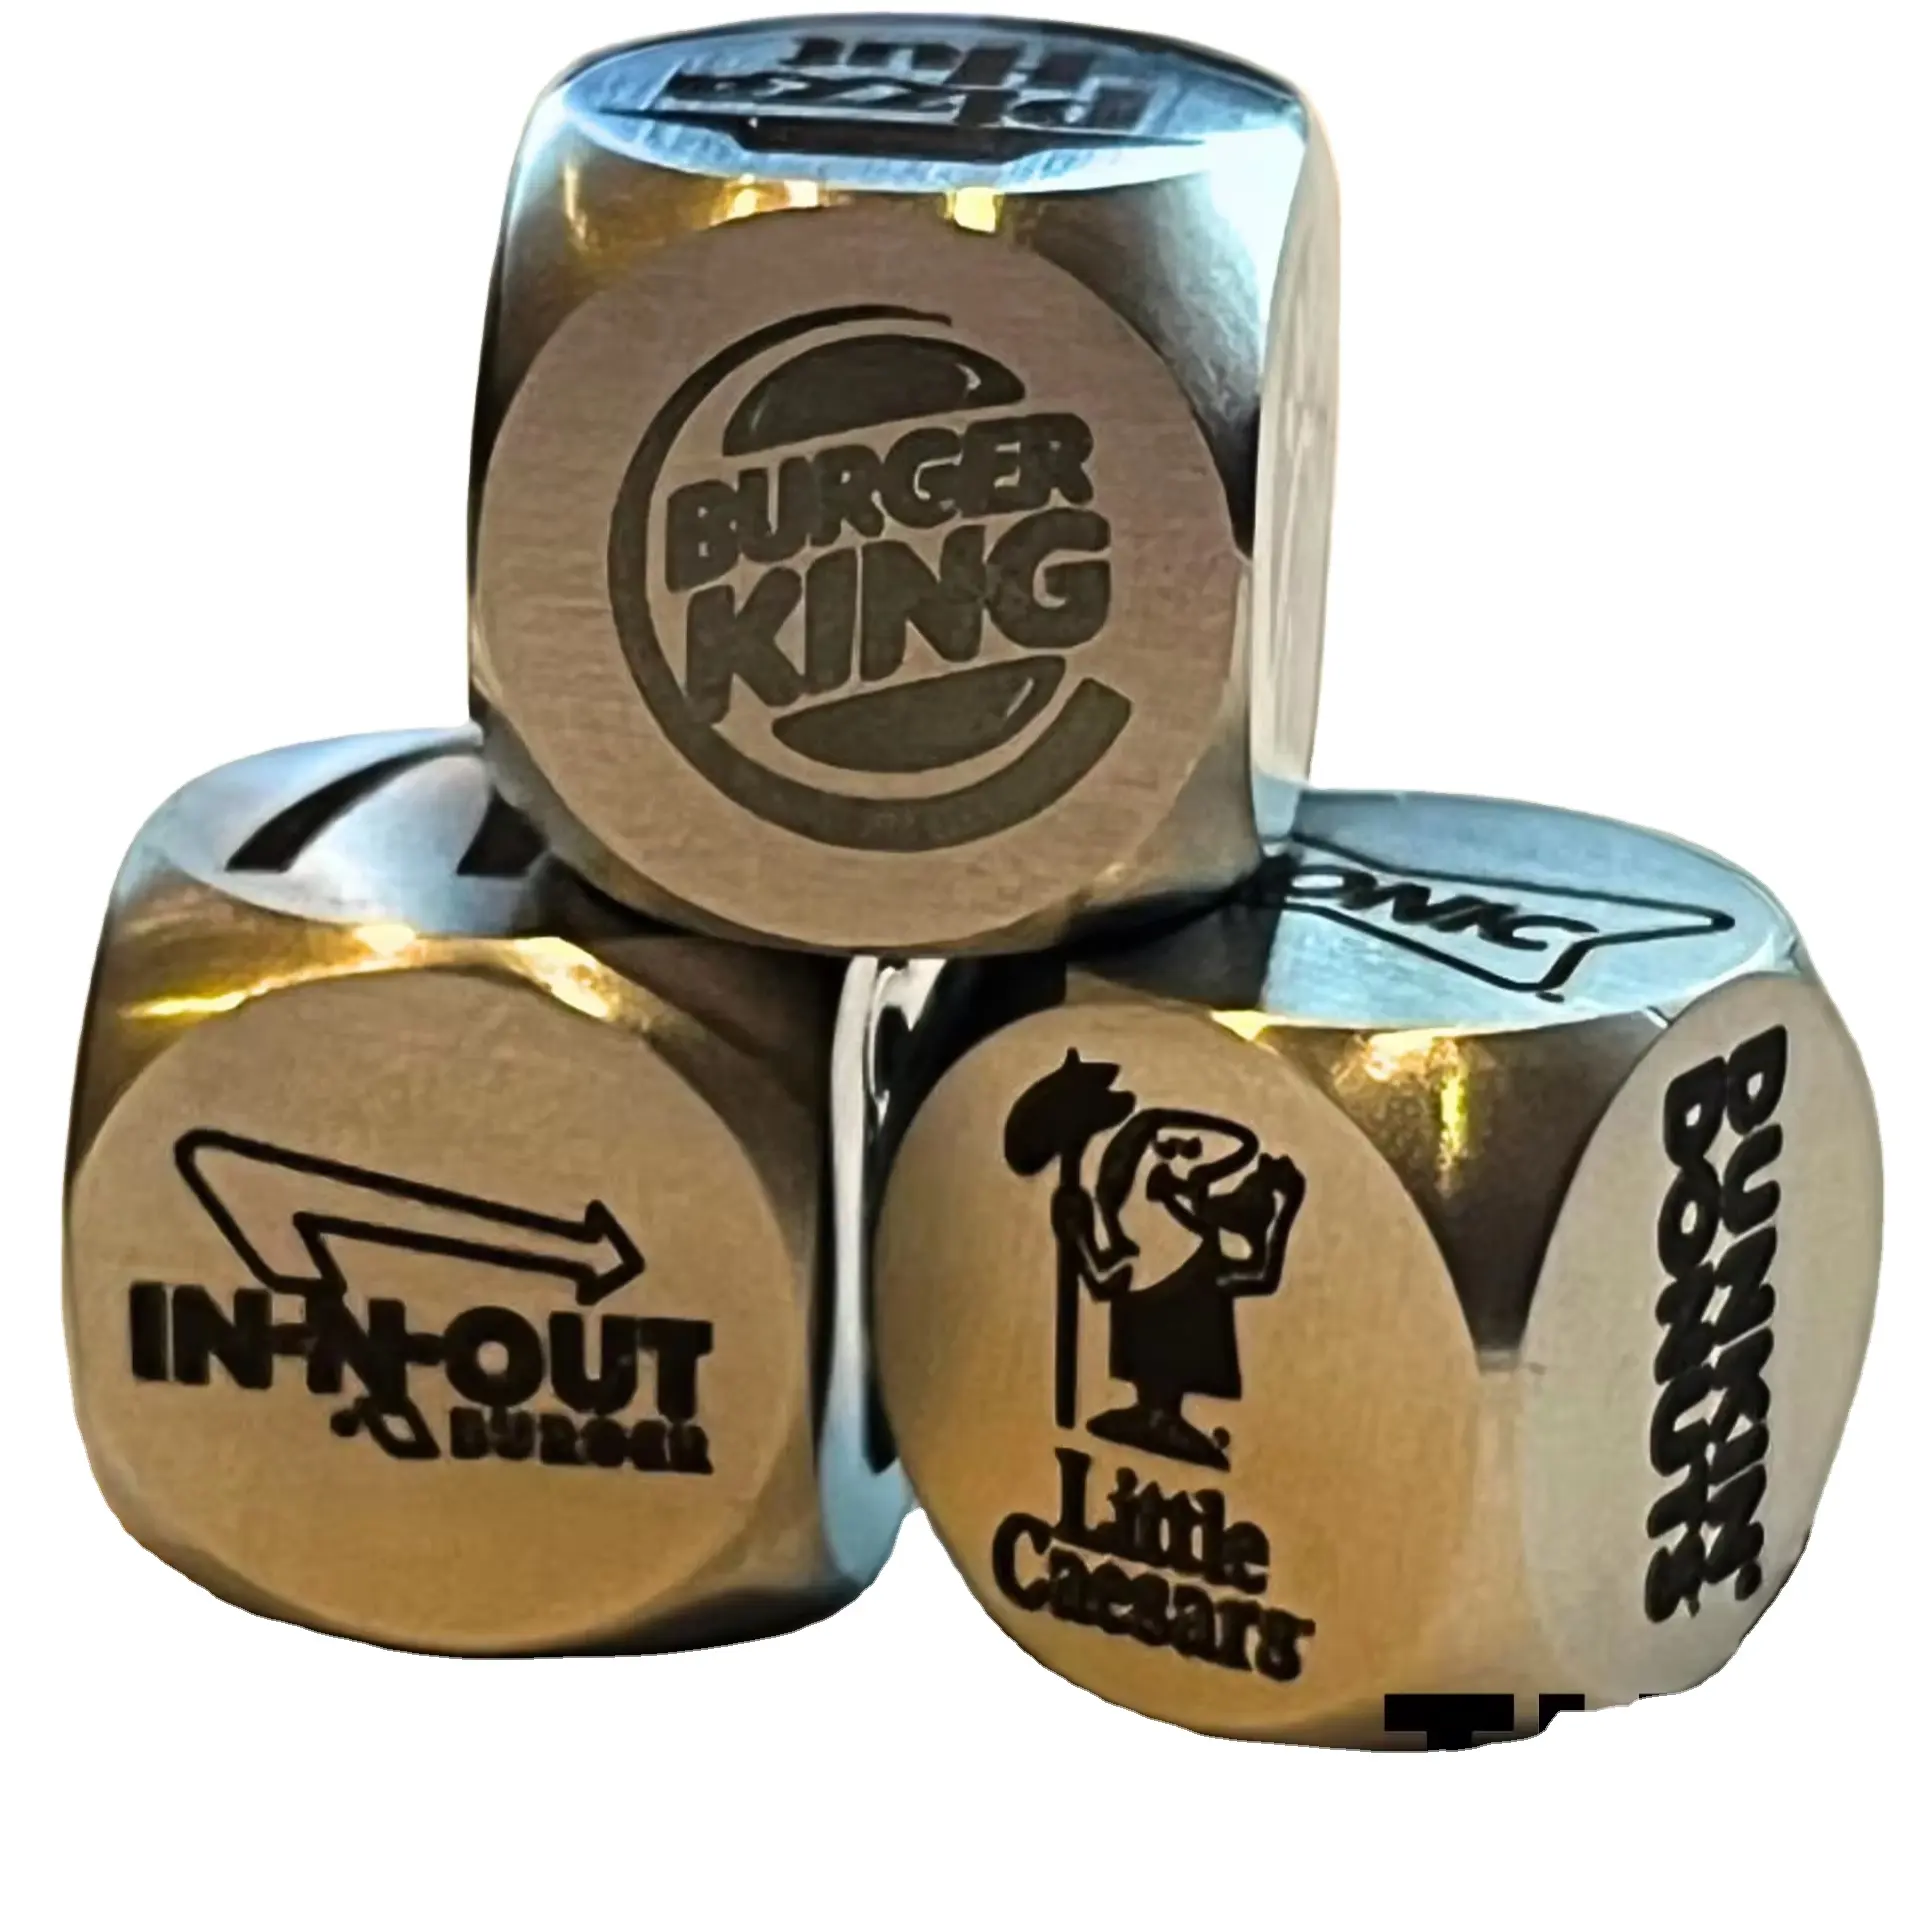 Fast Food Decision Dice-Novelty Gifts for Food Lovers Roll-The-Dice Game Official Decision Dice